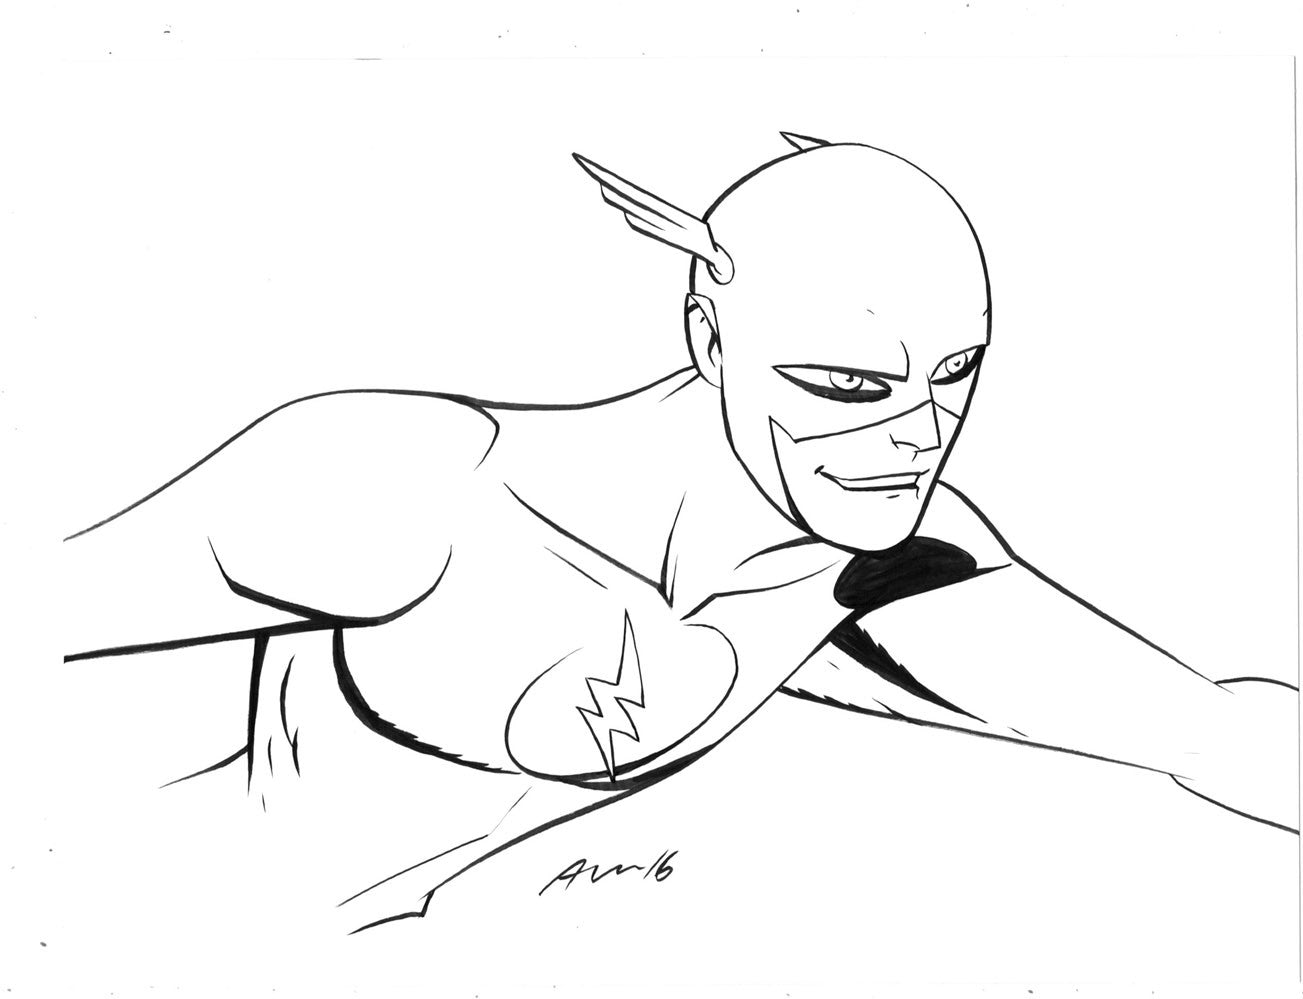 Daily Sketch The FLash!